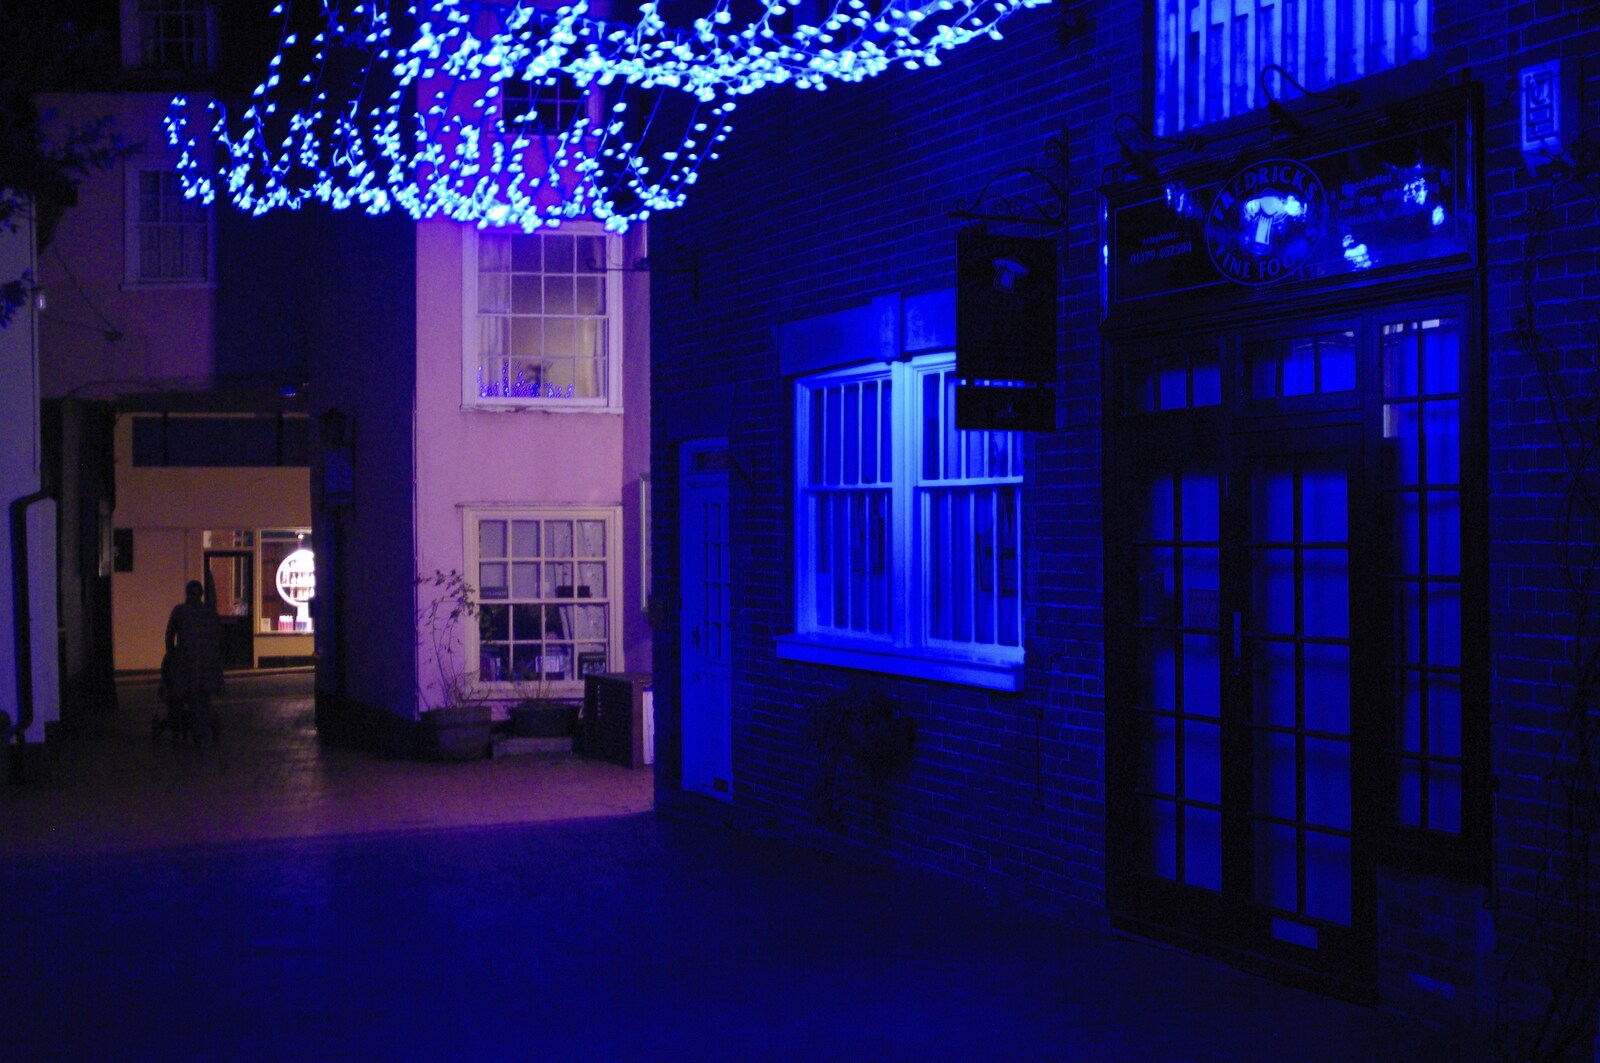 The blue lights of Norfolk Yard, Diss from Aldeburgh Lifeboats with The Old Chap, and a Night at Amandines, Diss, Norfolk - 1st March 2009